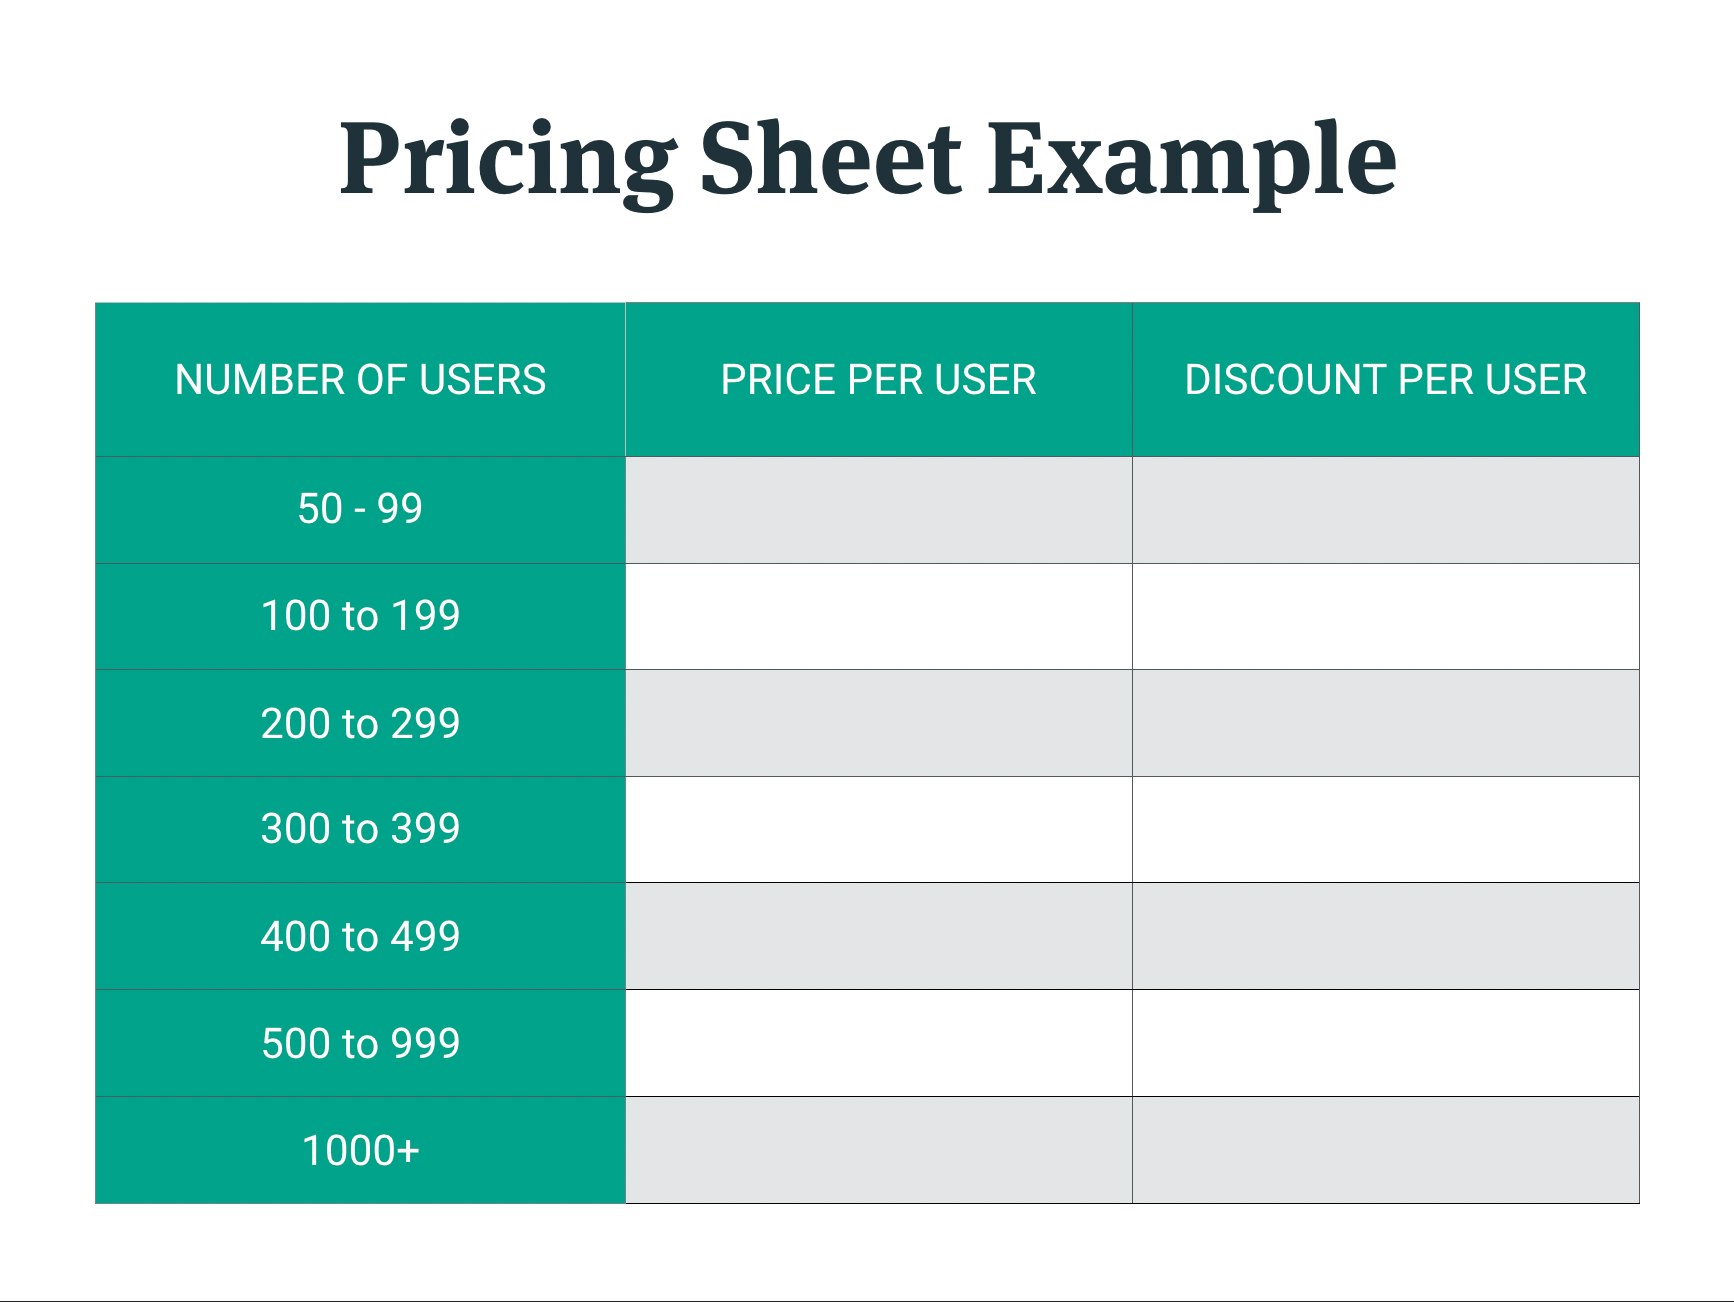 Pricing sheet example table: Columns headed number of users, price per user, discount per user